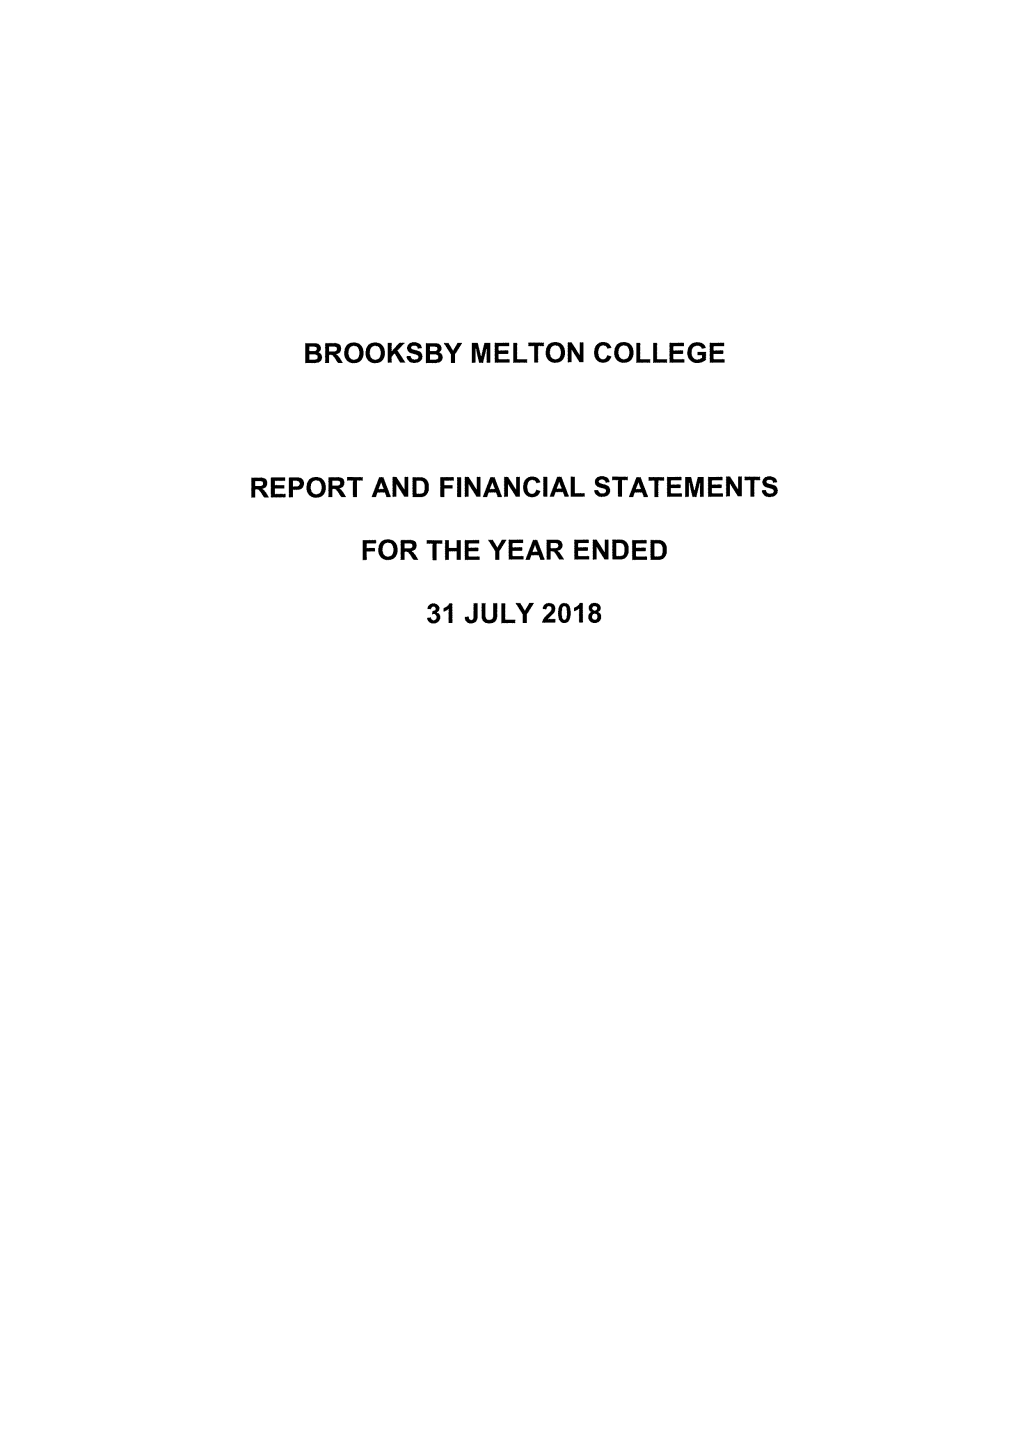 Report and Financial Statements 2017-18